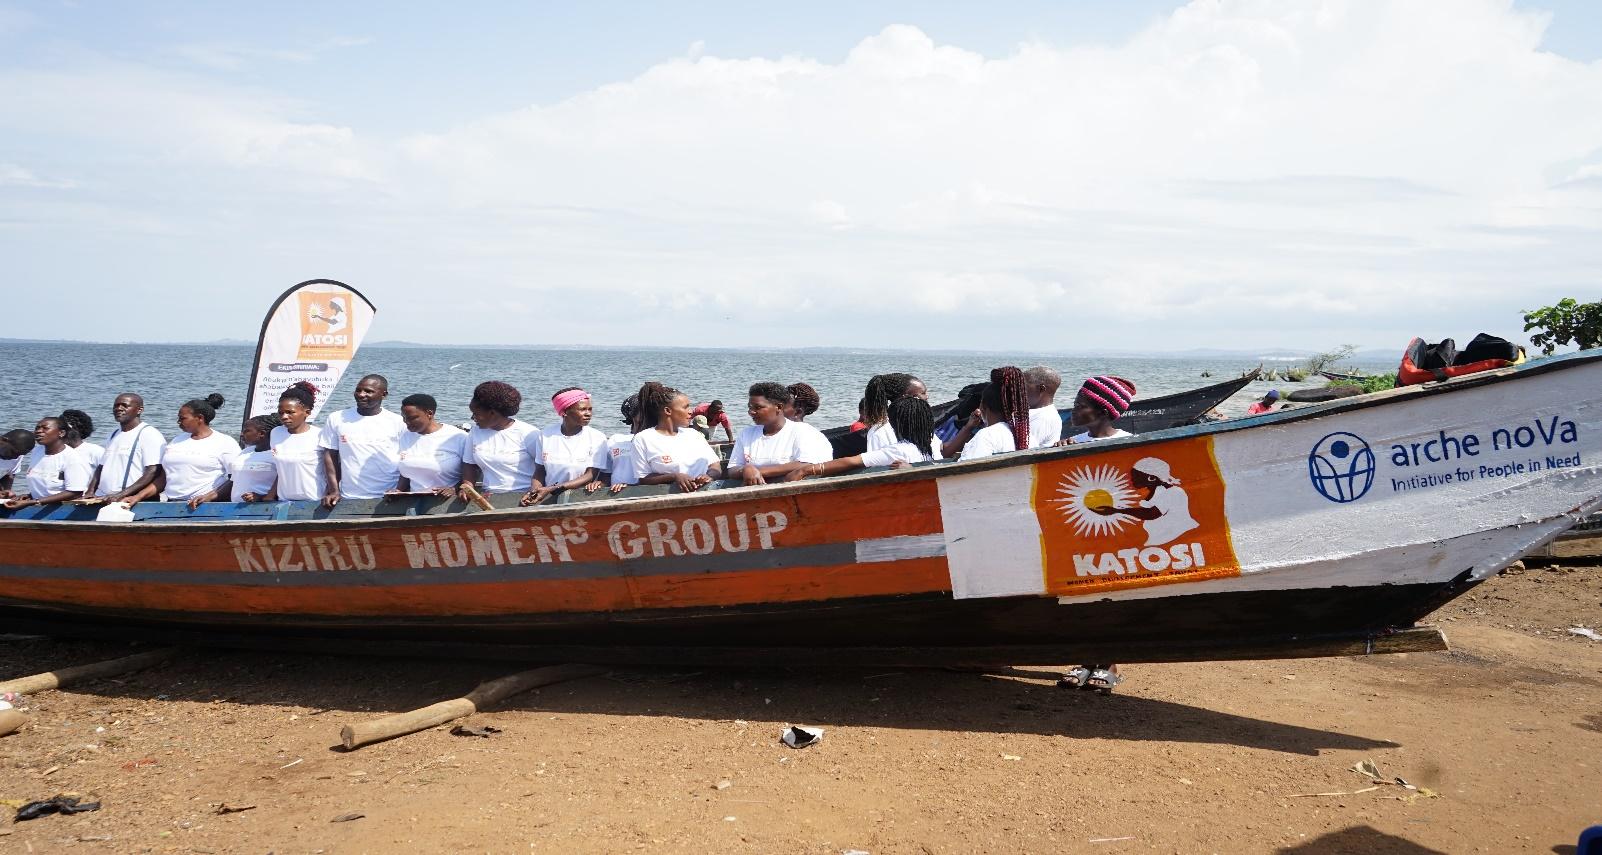 Several Kiziru Women’s Group members sit in their fishing boat for International Year of Artisanal Fisheries and Aquaculture 2022 on a beach. Photo Credit: KWDT